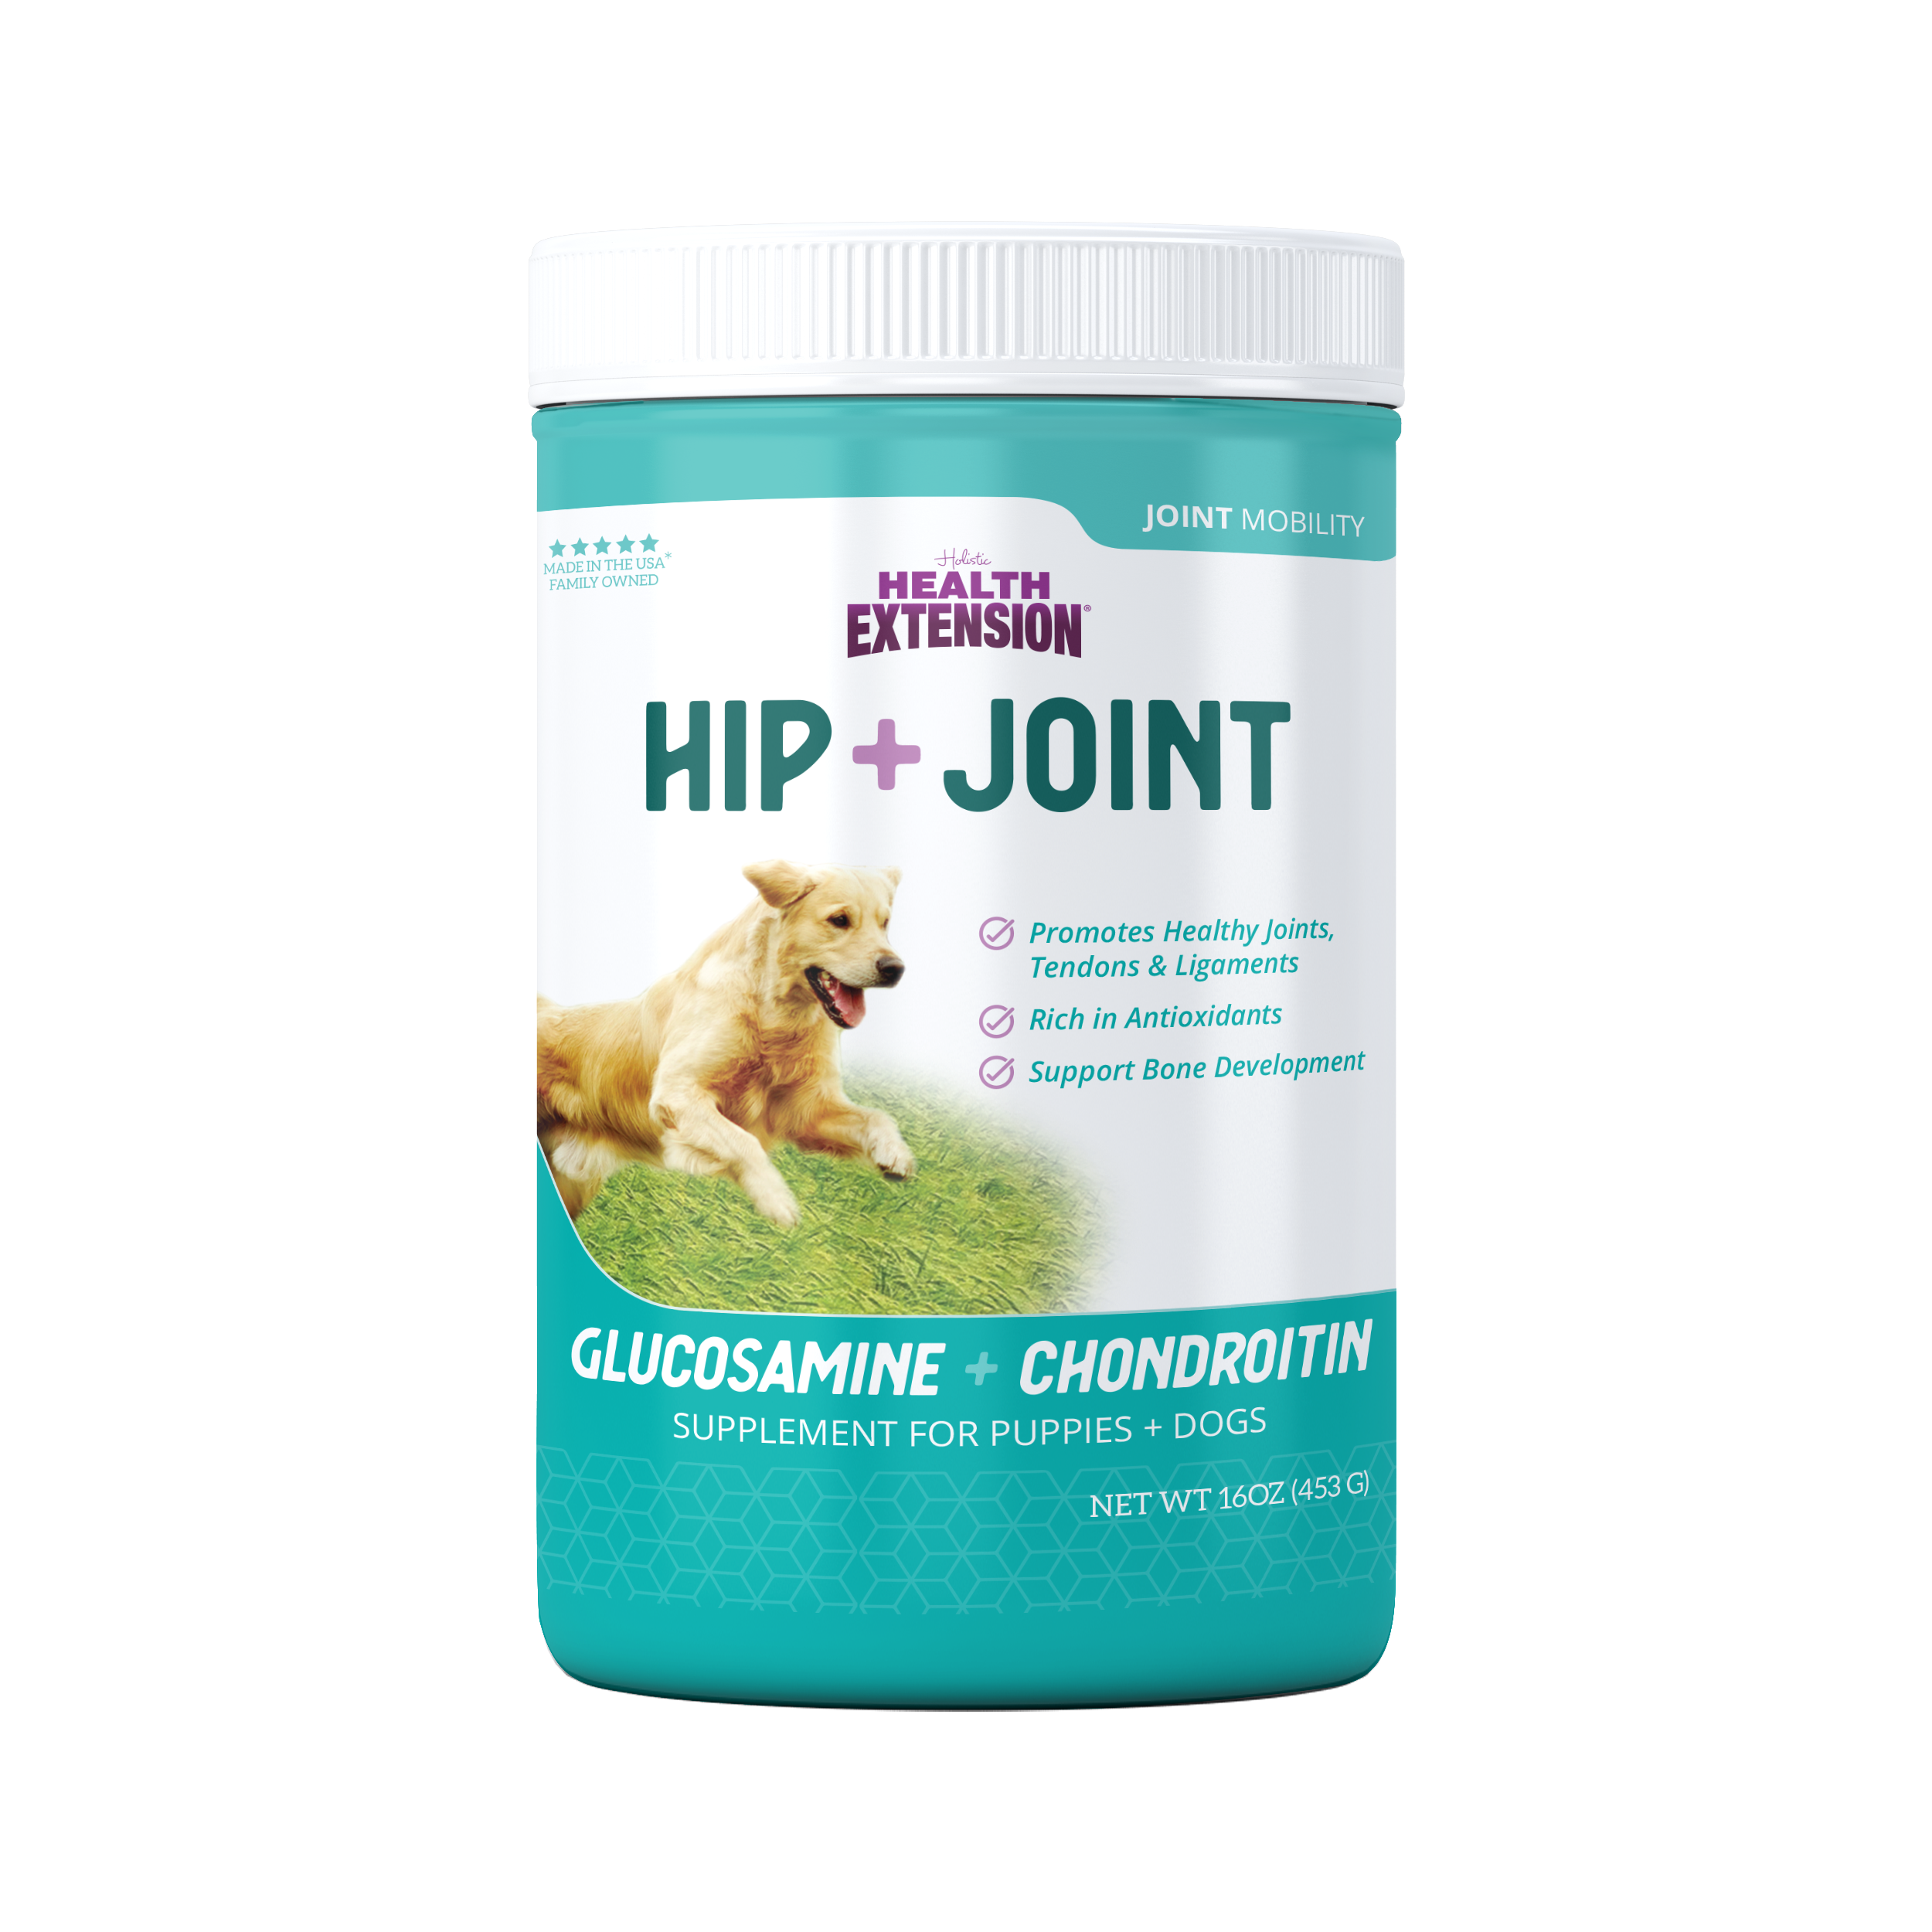 HIP + JOINT Mobility Supplement